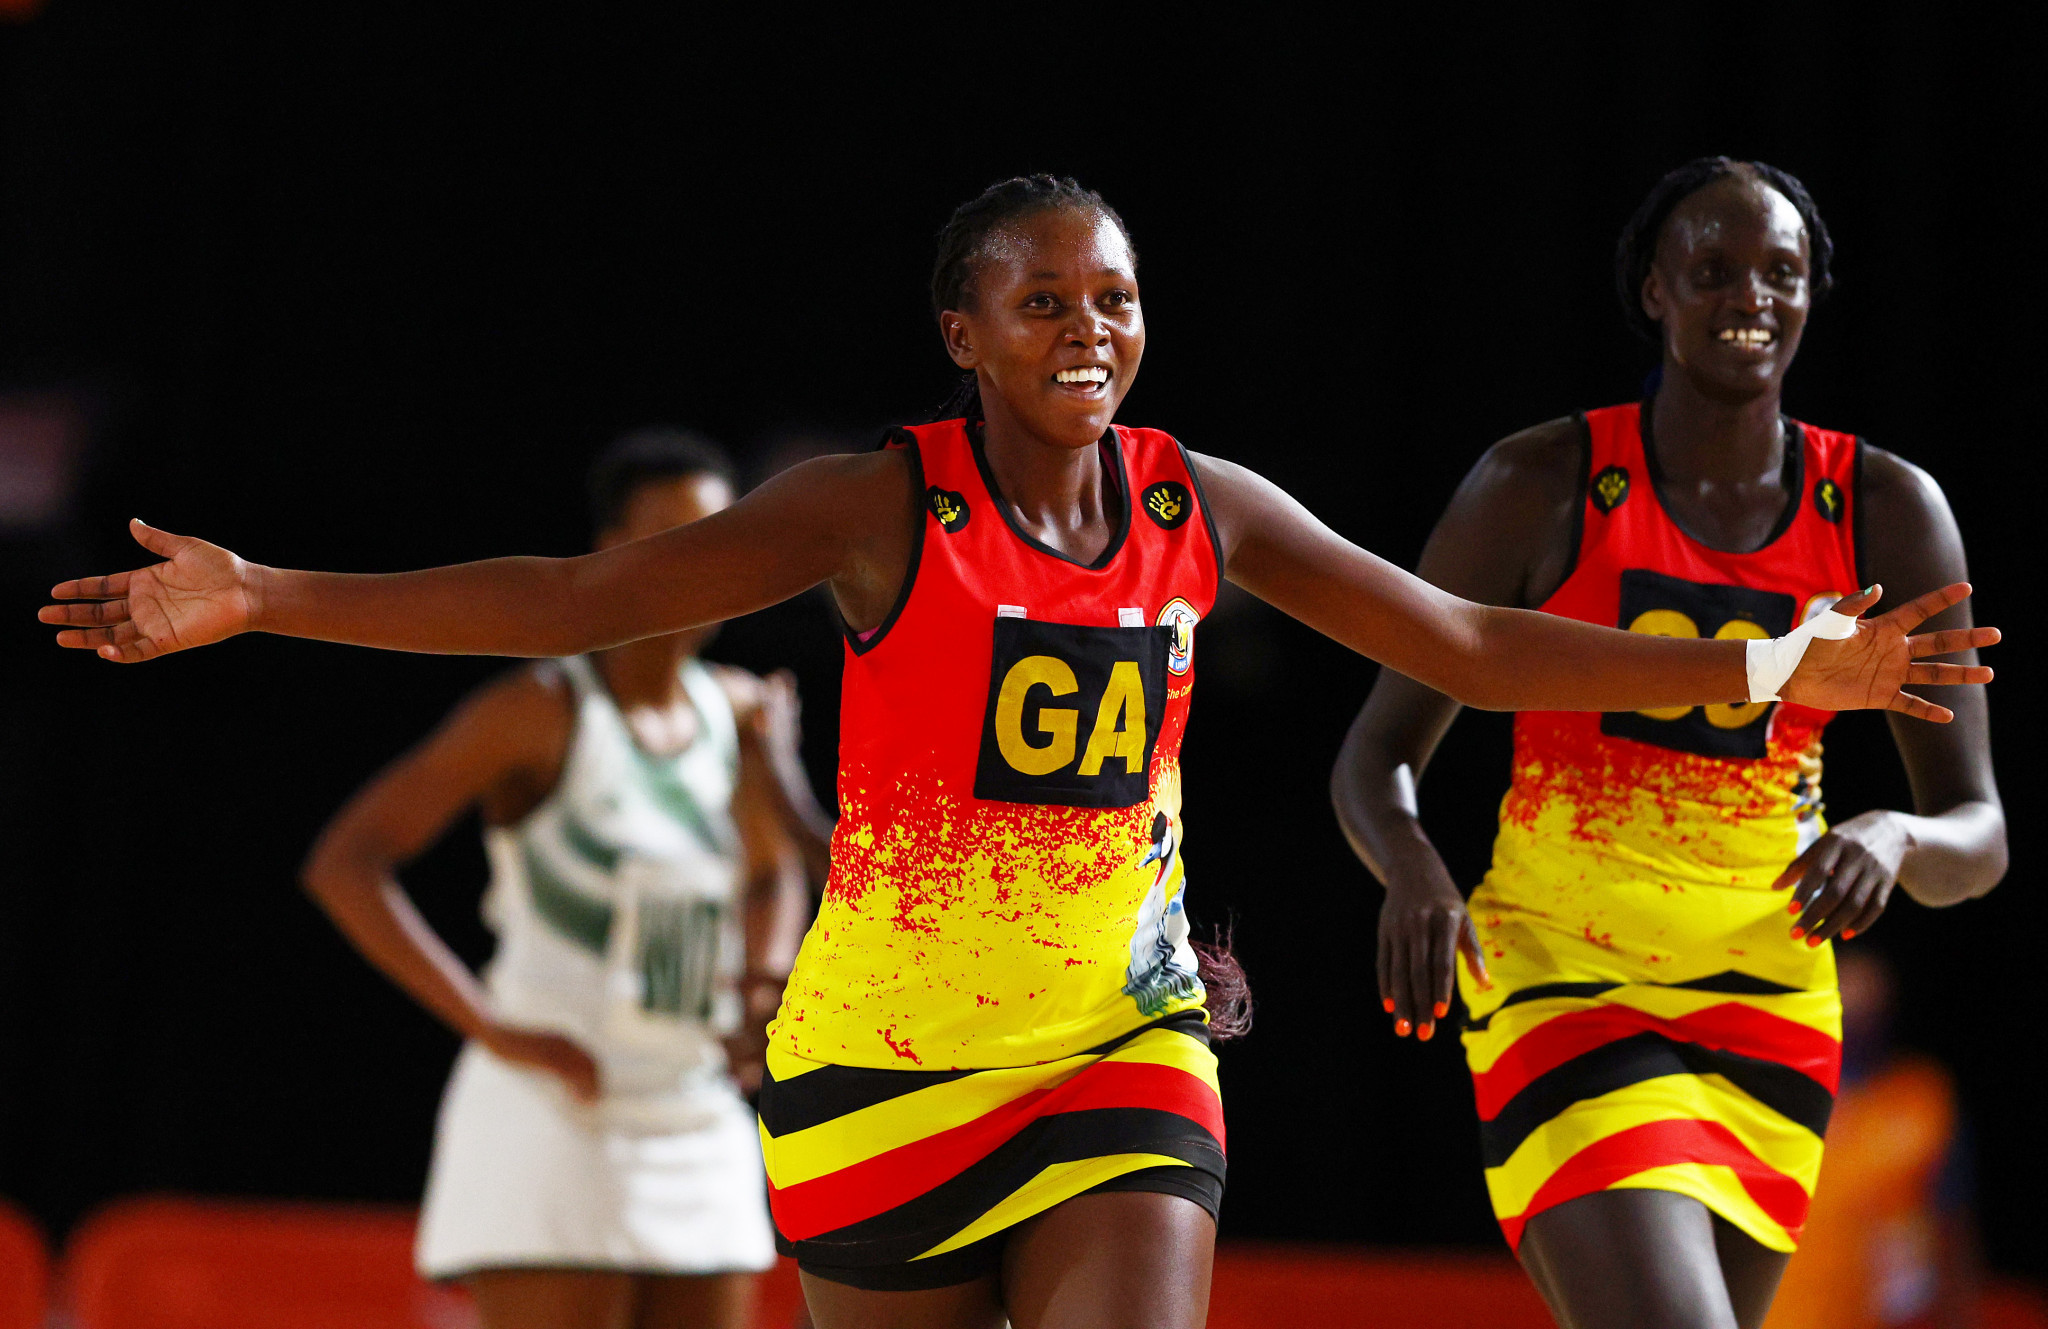 Uganda finished fifth overall in the netball tournament at the Birmingham 2022 Commonwealth Games ©Getty Images